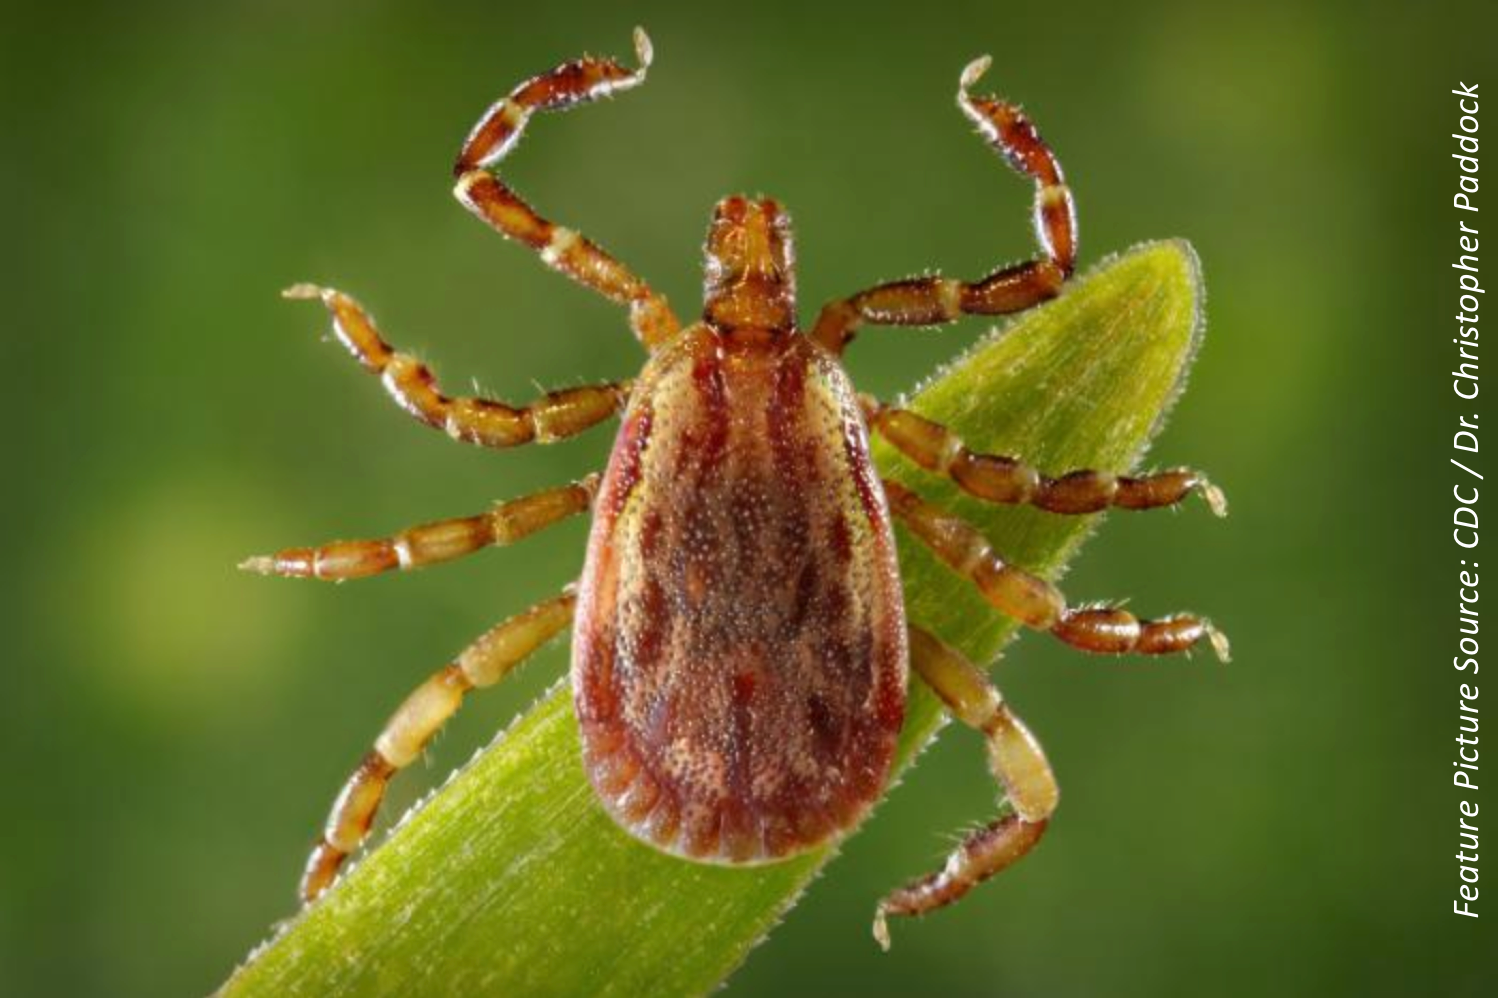 Brown Dog Tick Causes RMSF Epidemic in Mexico, Could Spread Stateside